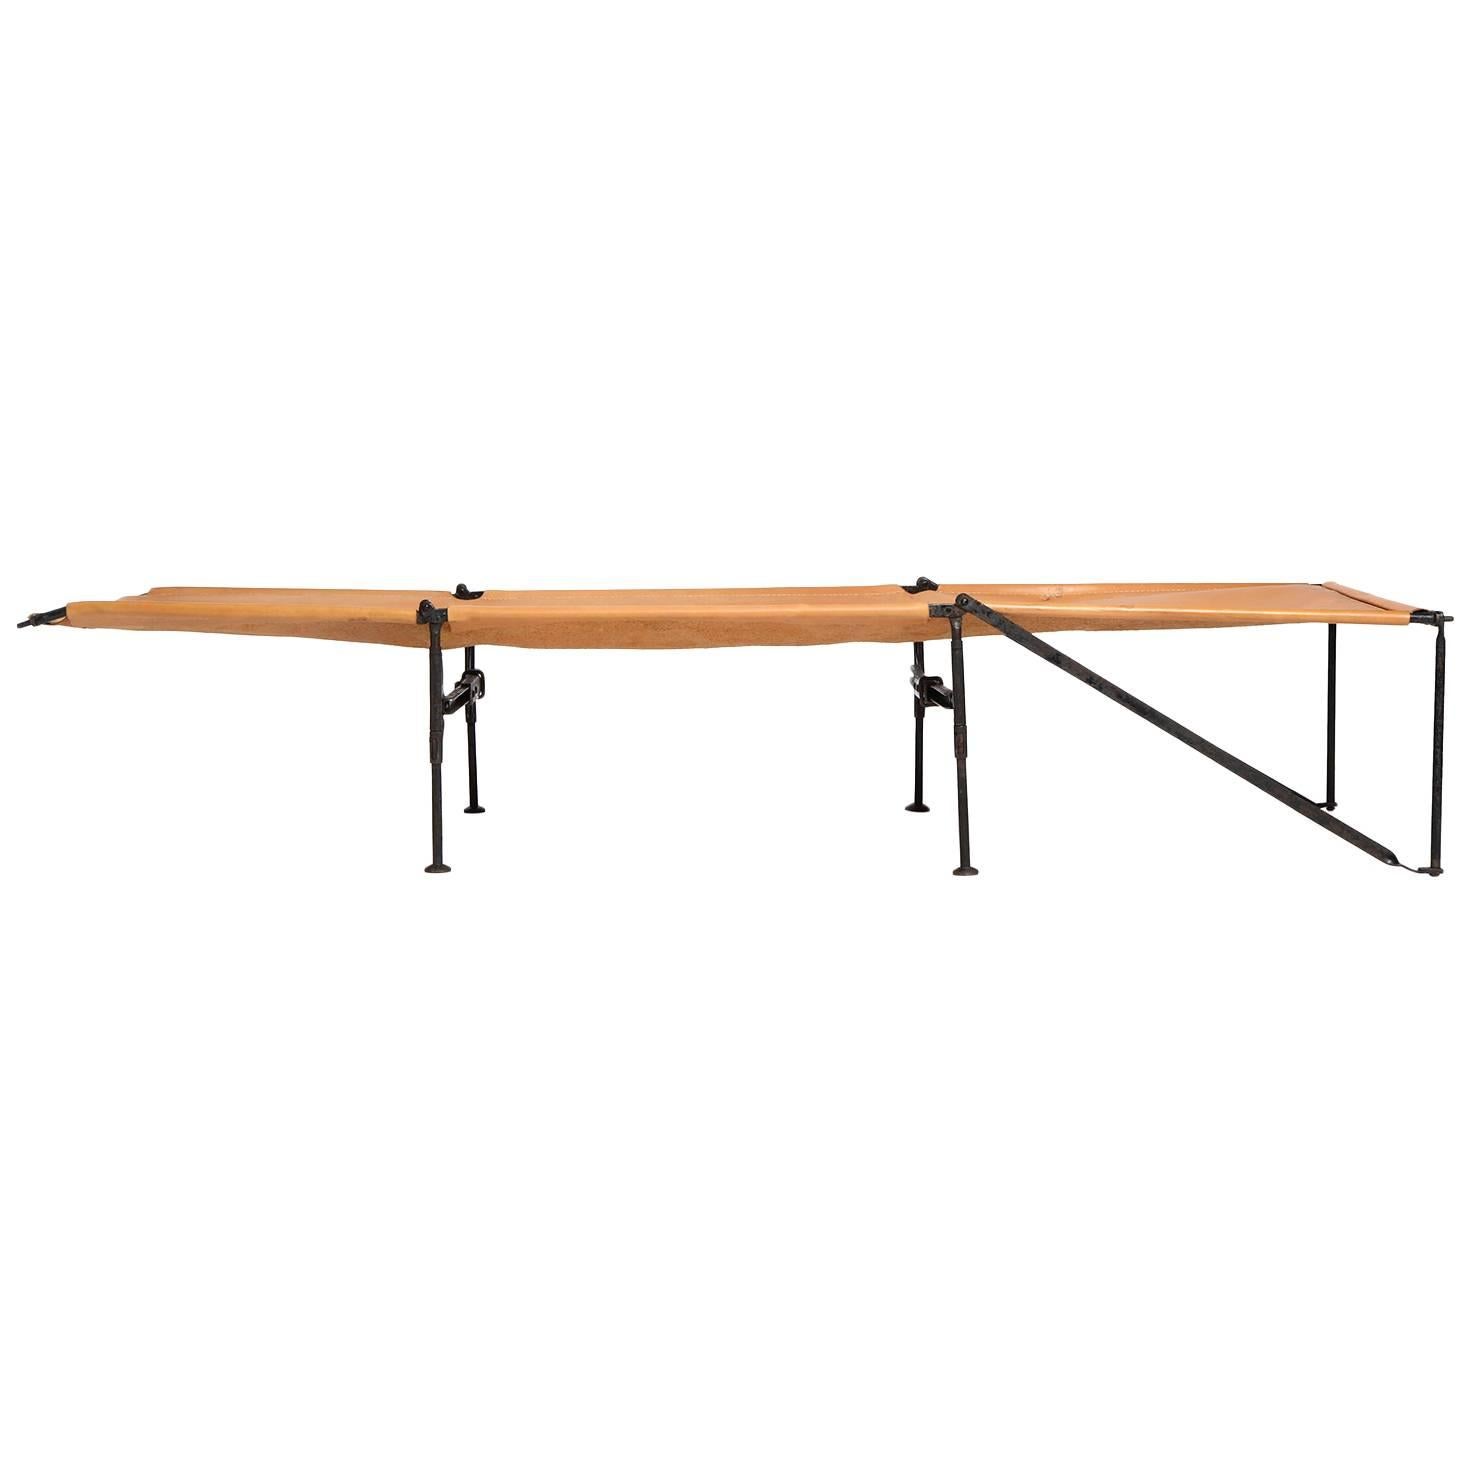  Leather Topped Folding Cot  For Sale